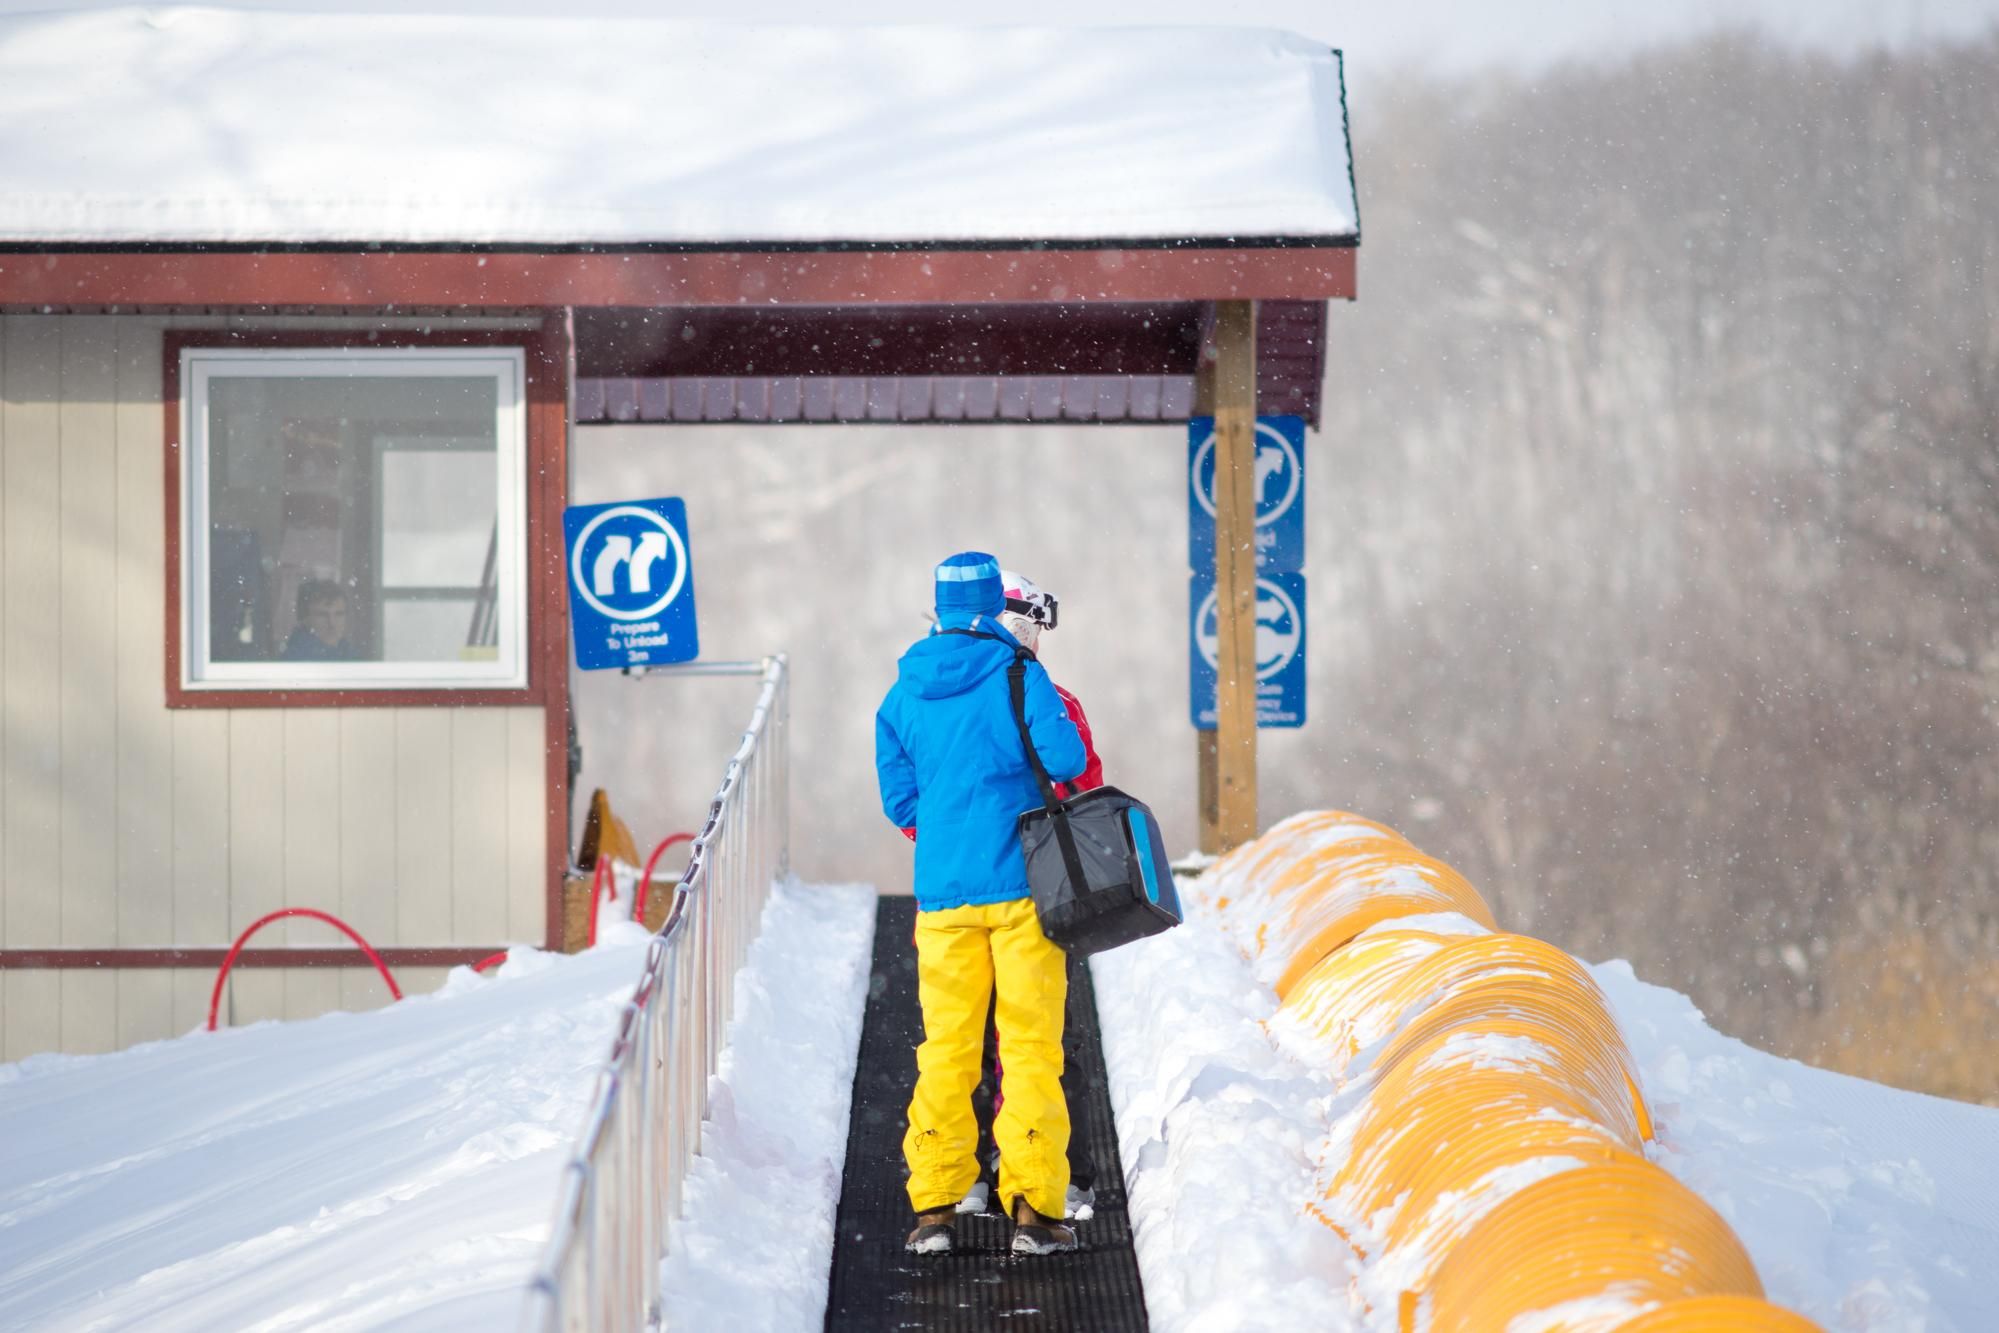  First Quebec COVID-19 Class Action Against Ski Hill Operator Can’t Go Ahead, Judge Rules